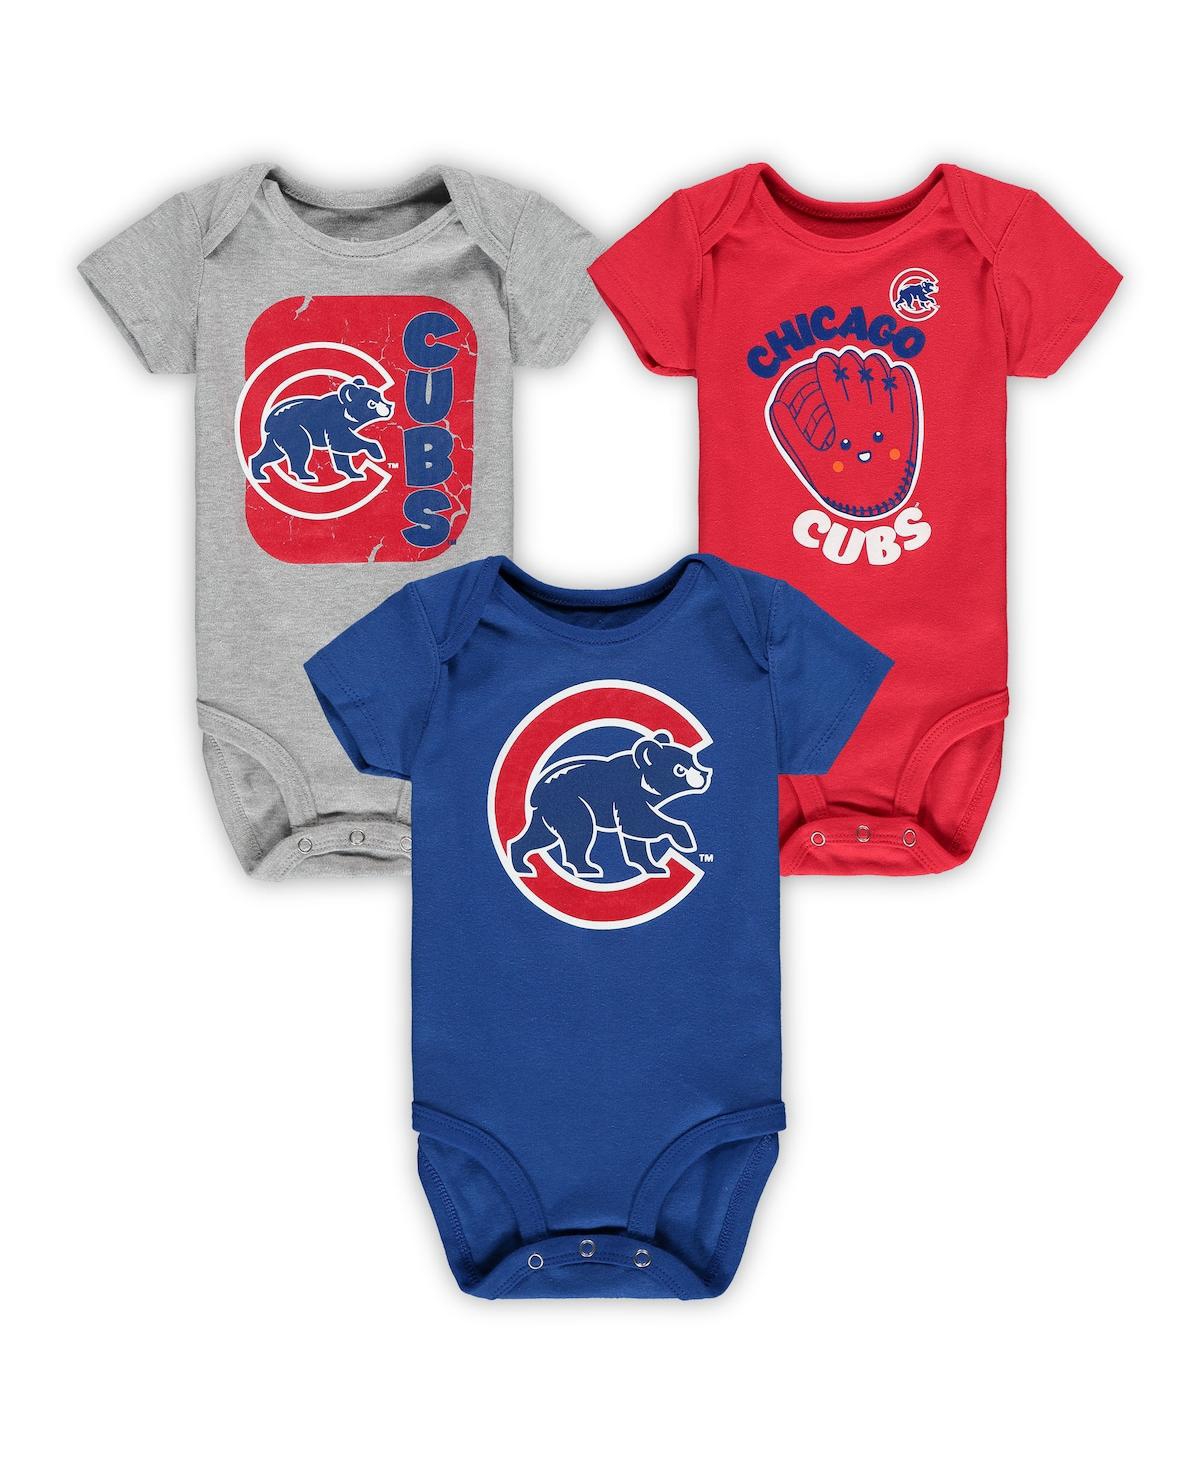 Outerstuff Babies' Infant Boys And Girls Royal, Red, Heathered Gray Chicago Cubs Change Up 3-pack Bodysuit Set In Royal,red,heathered Gray